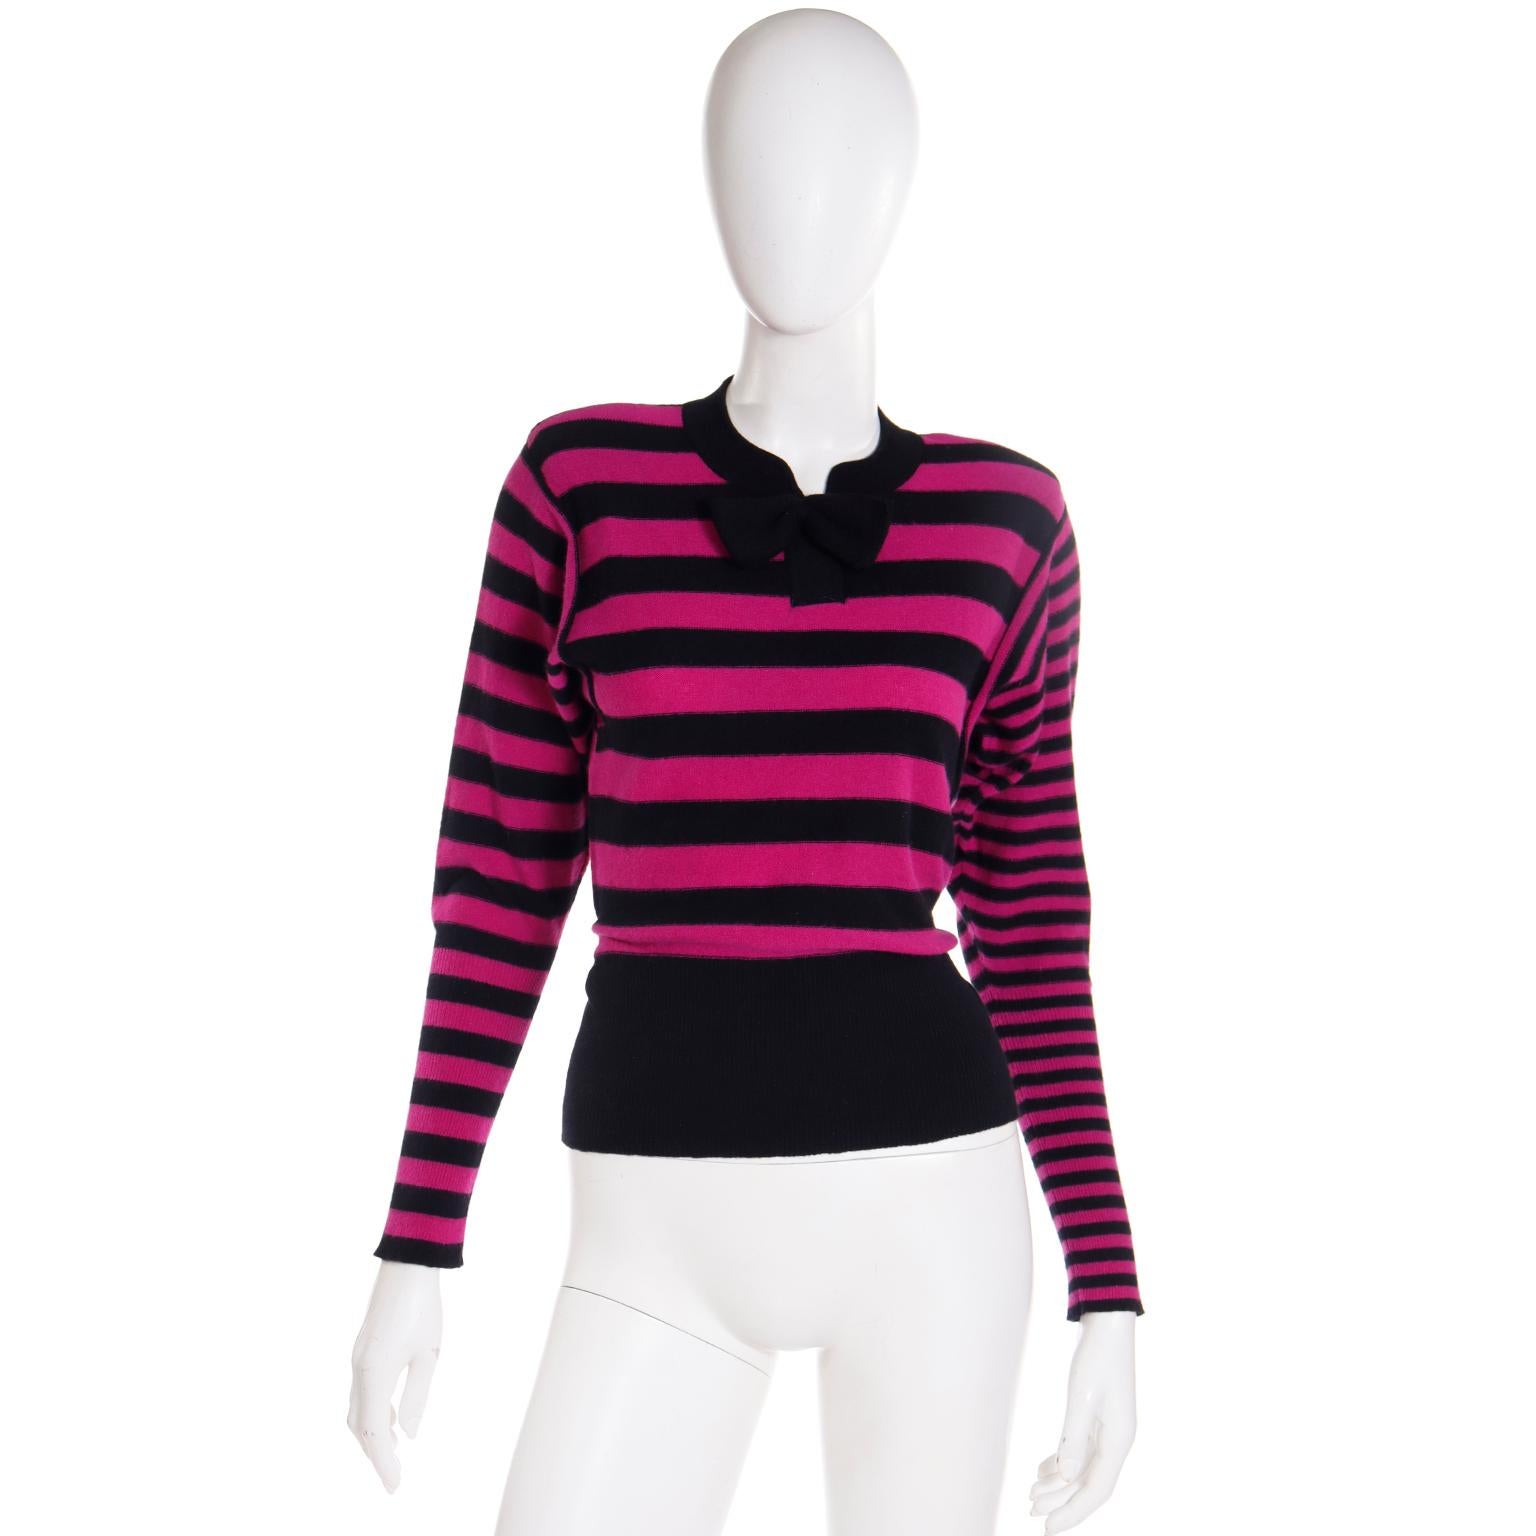 Vintage Sonia Rykiel tops and sweaters are so essential to add to any vintage collector's wardrobe! If you are wanting  something that not only is historically significant, but can be seamlessly added to a modern wardrobe, this is the perfect piece